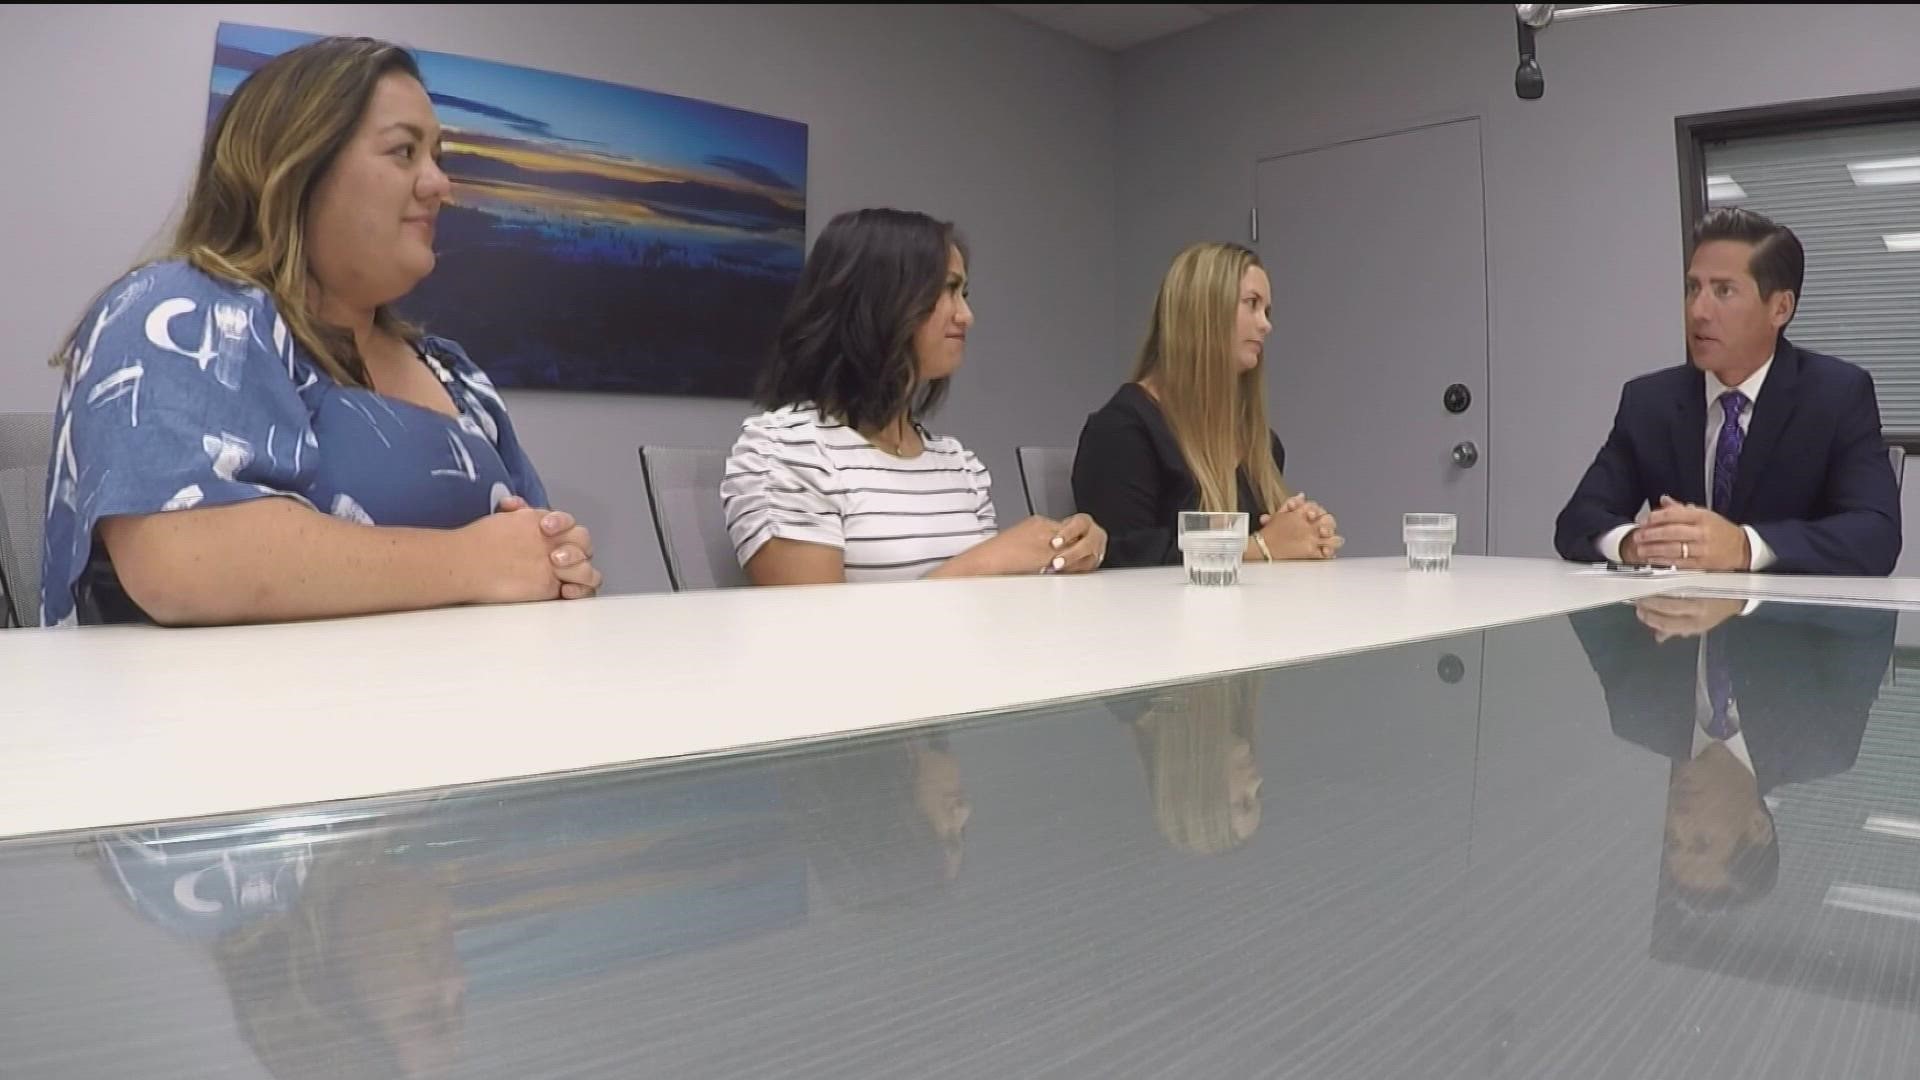 CBS 8's Eric Kahnert sat down with three Poway Unified School District Student counselors to talk about what parents can do to help their students this summer.